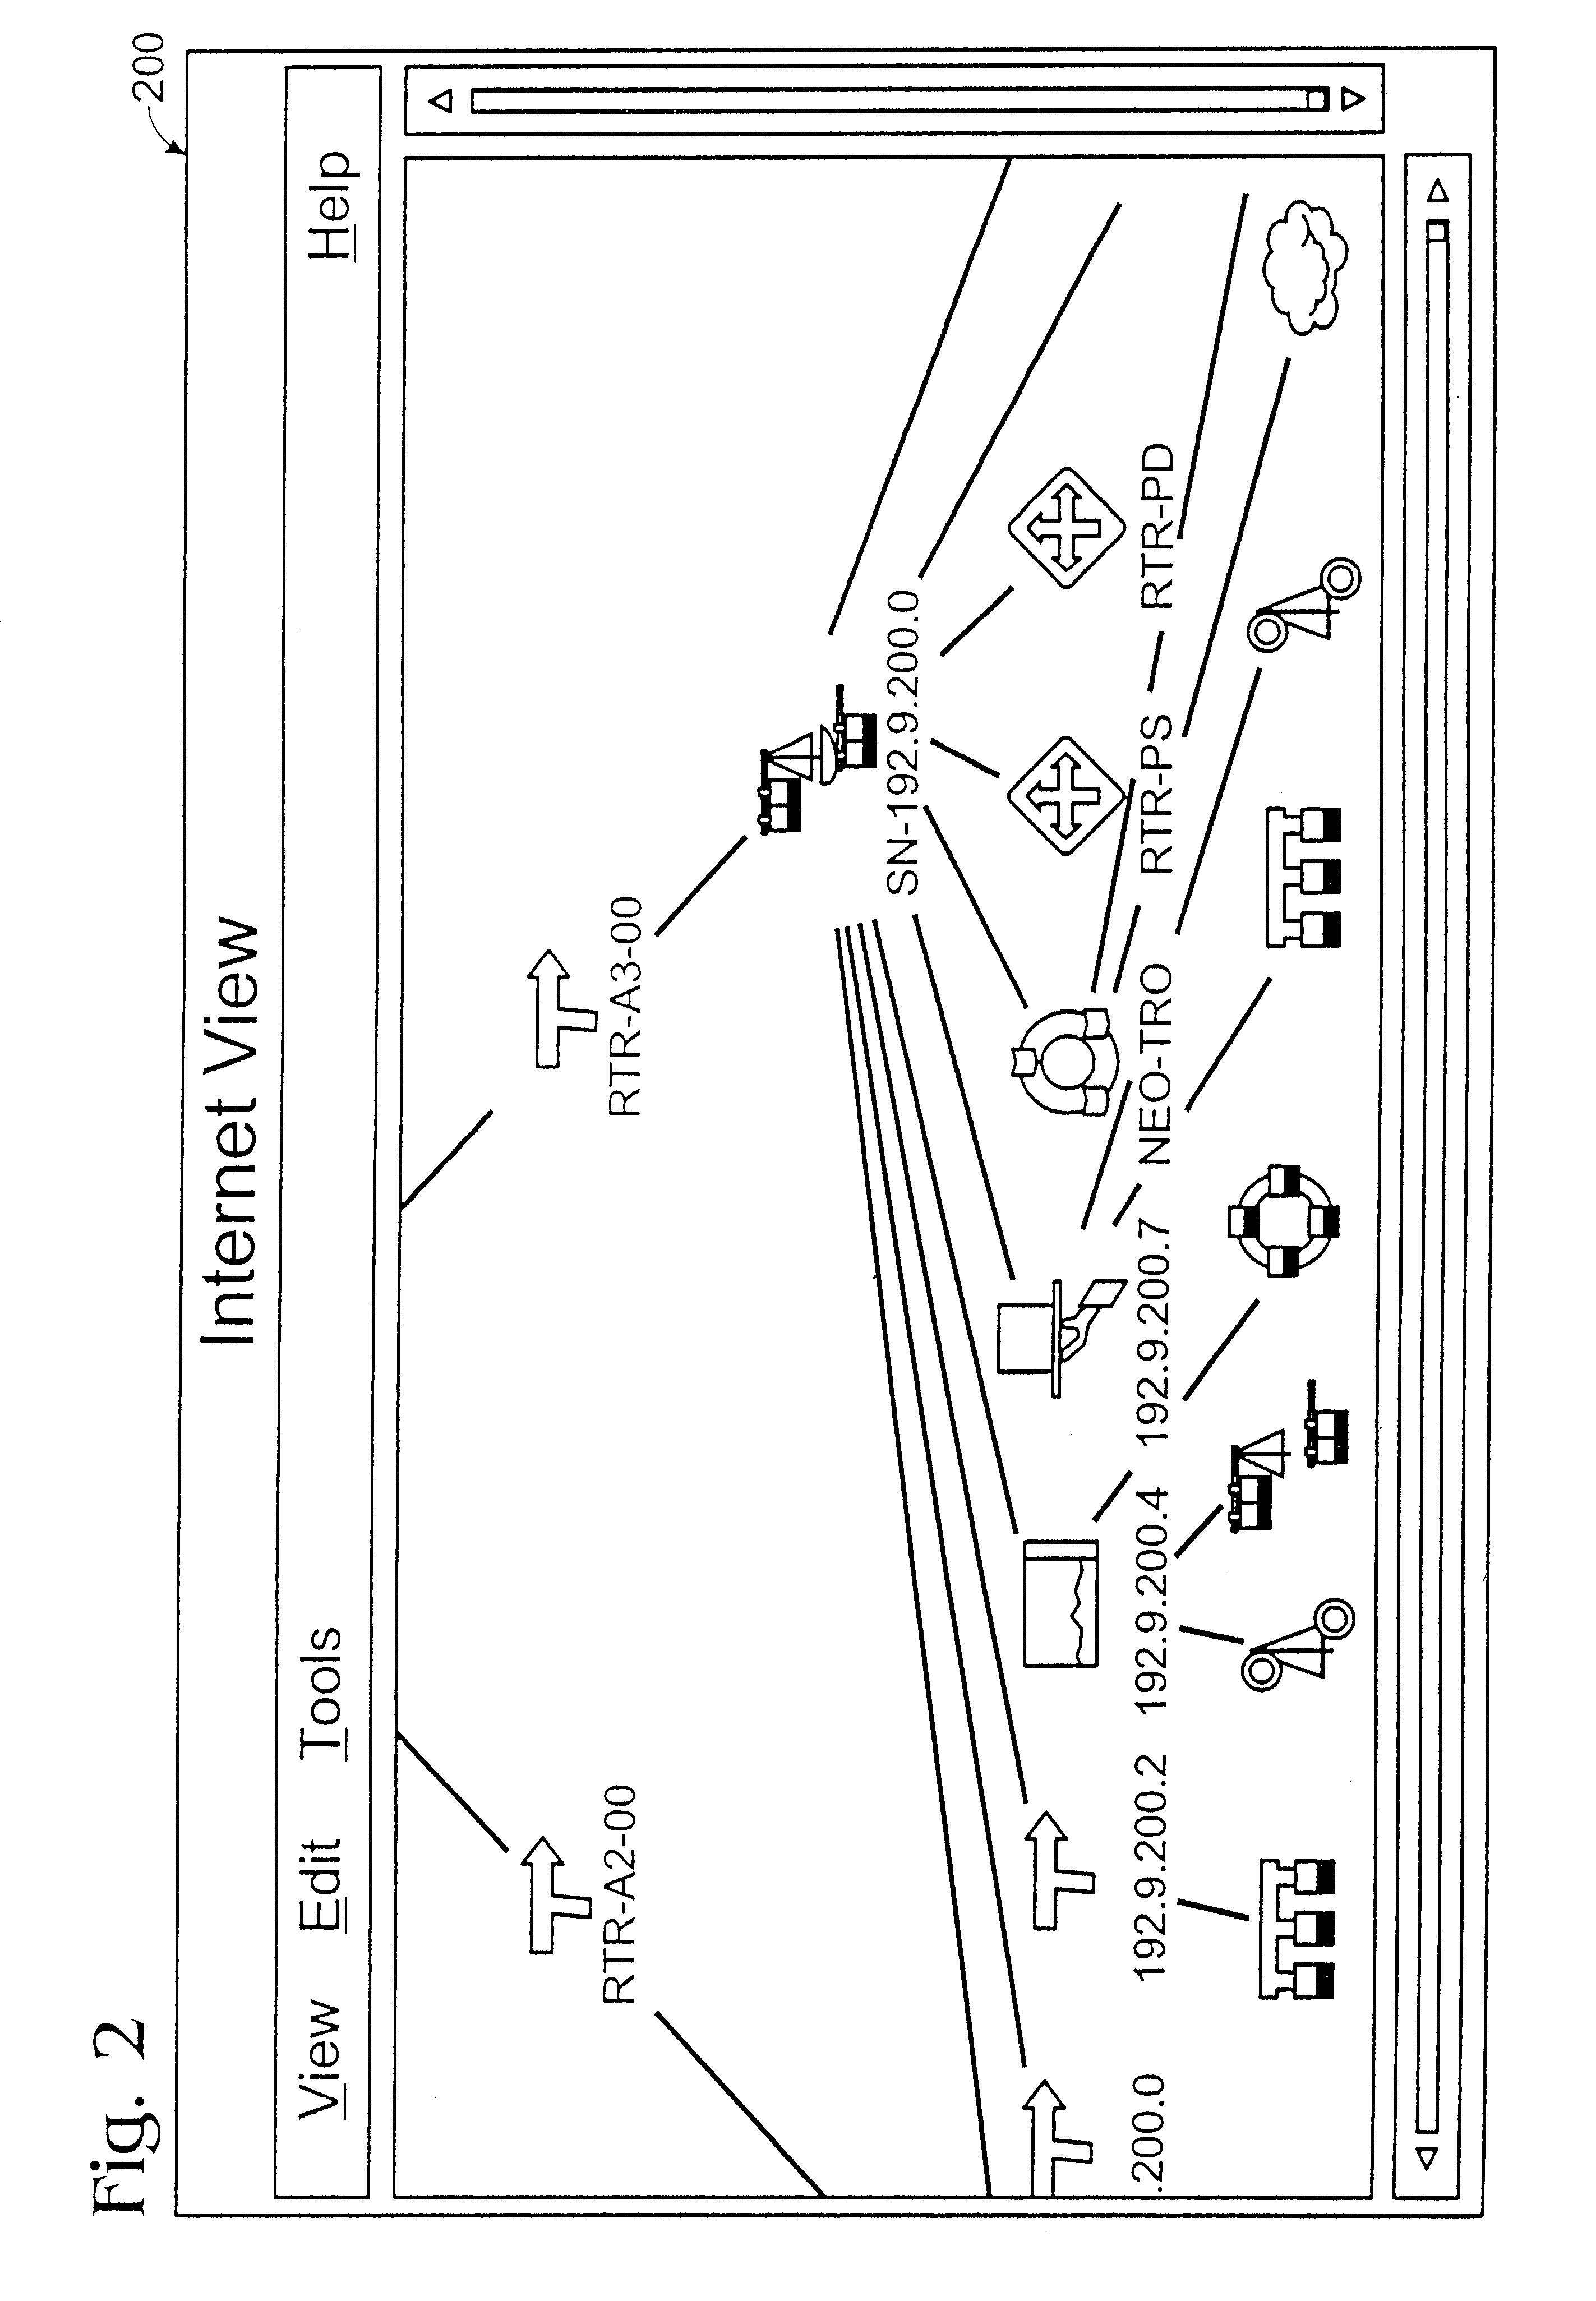 Method and apparatus for displaying health status of network devices